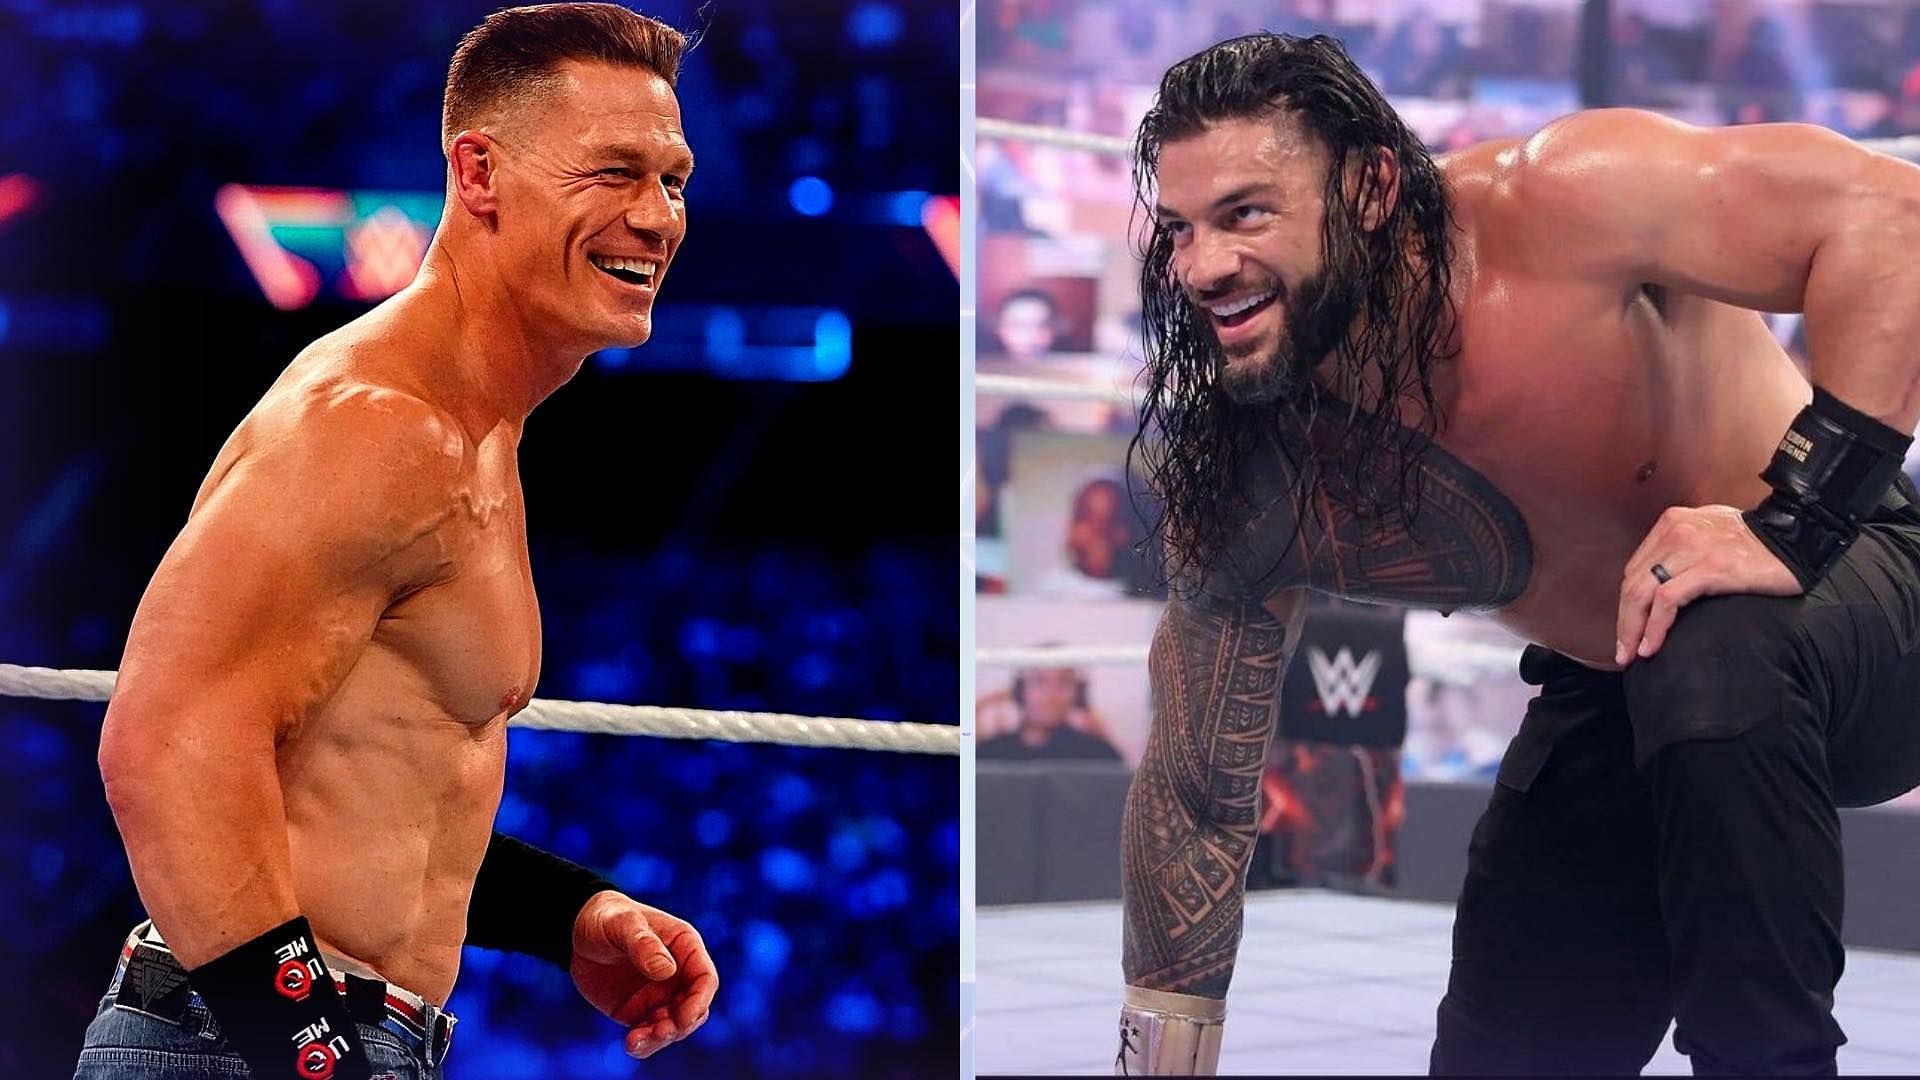 New feuds could kick off on WWE SmackDown